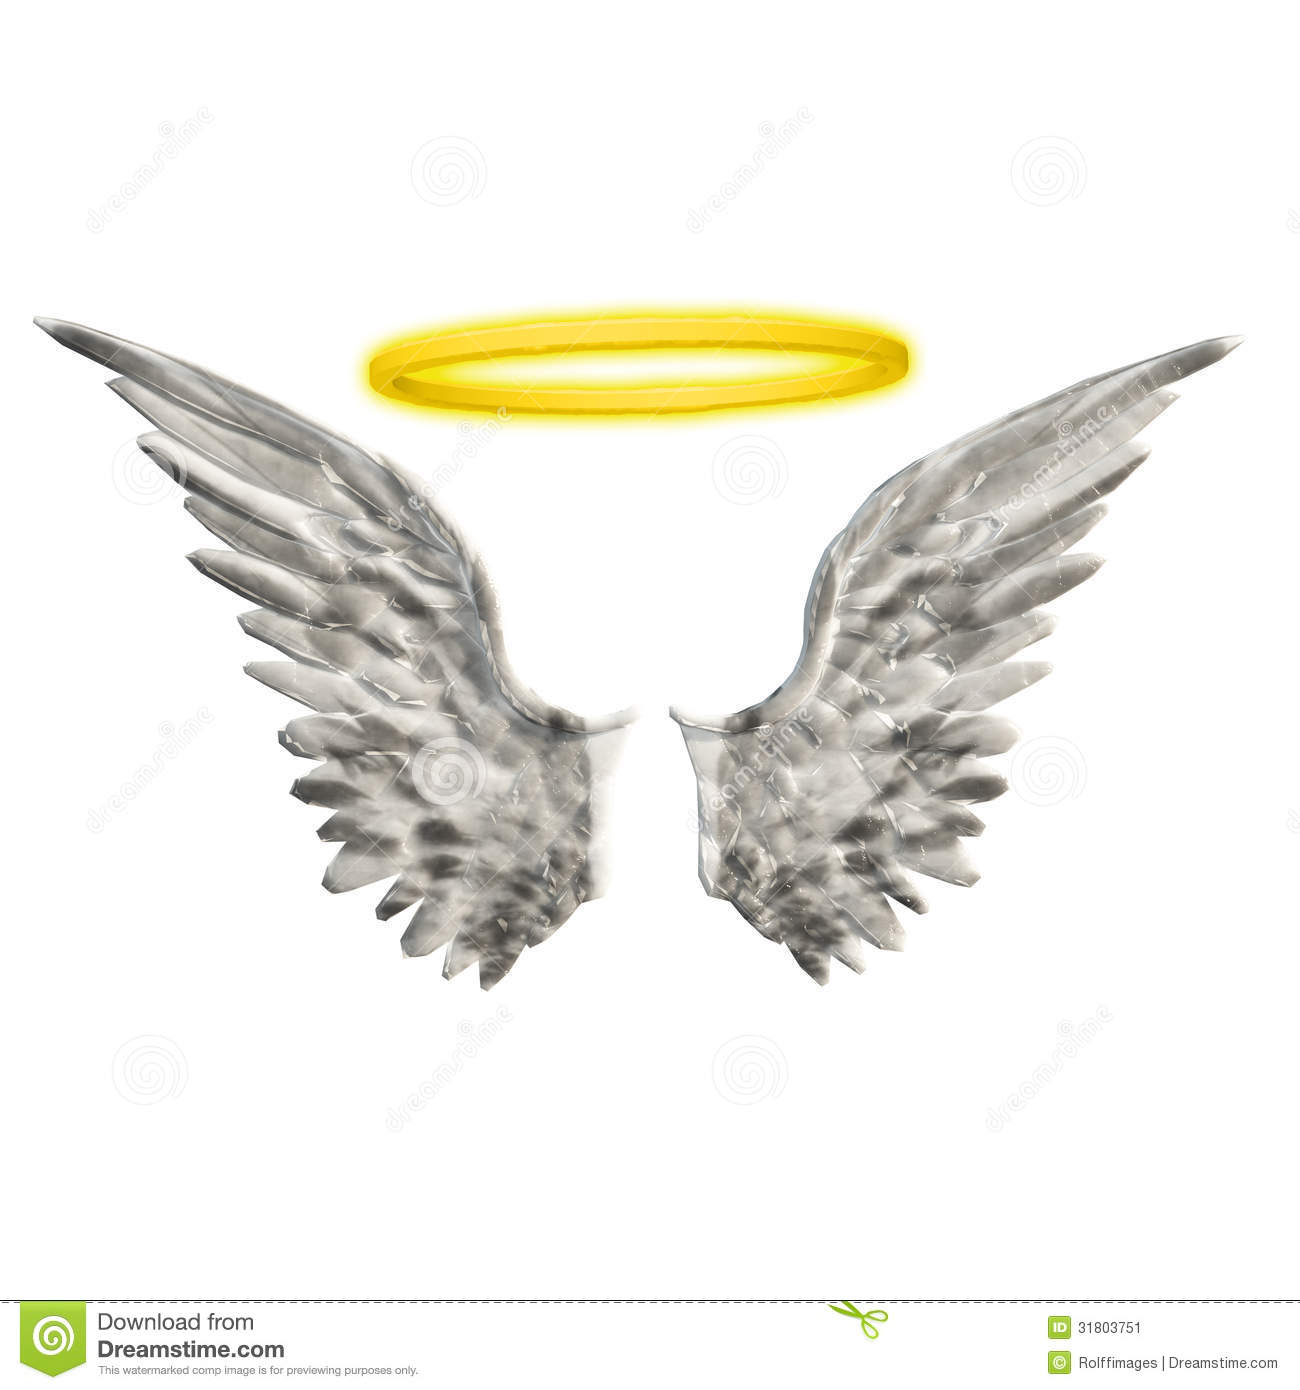 Wings Halo Stock Image   Image  31803751